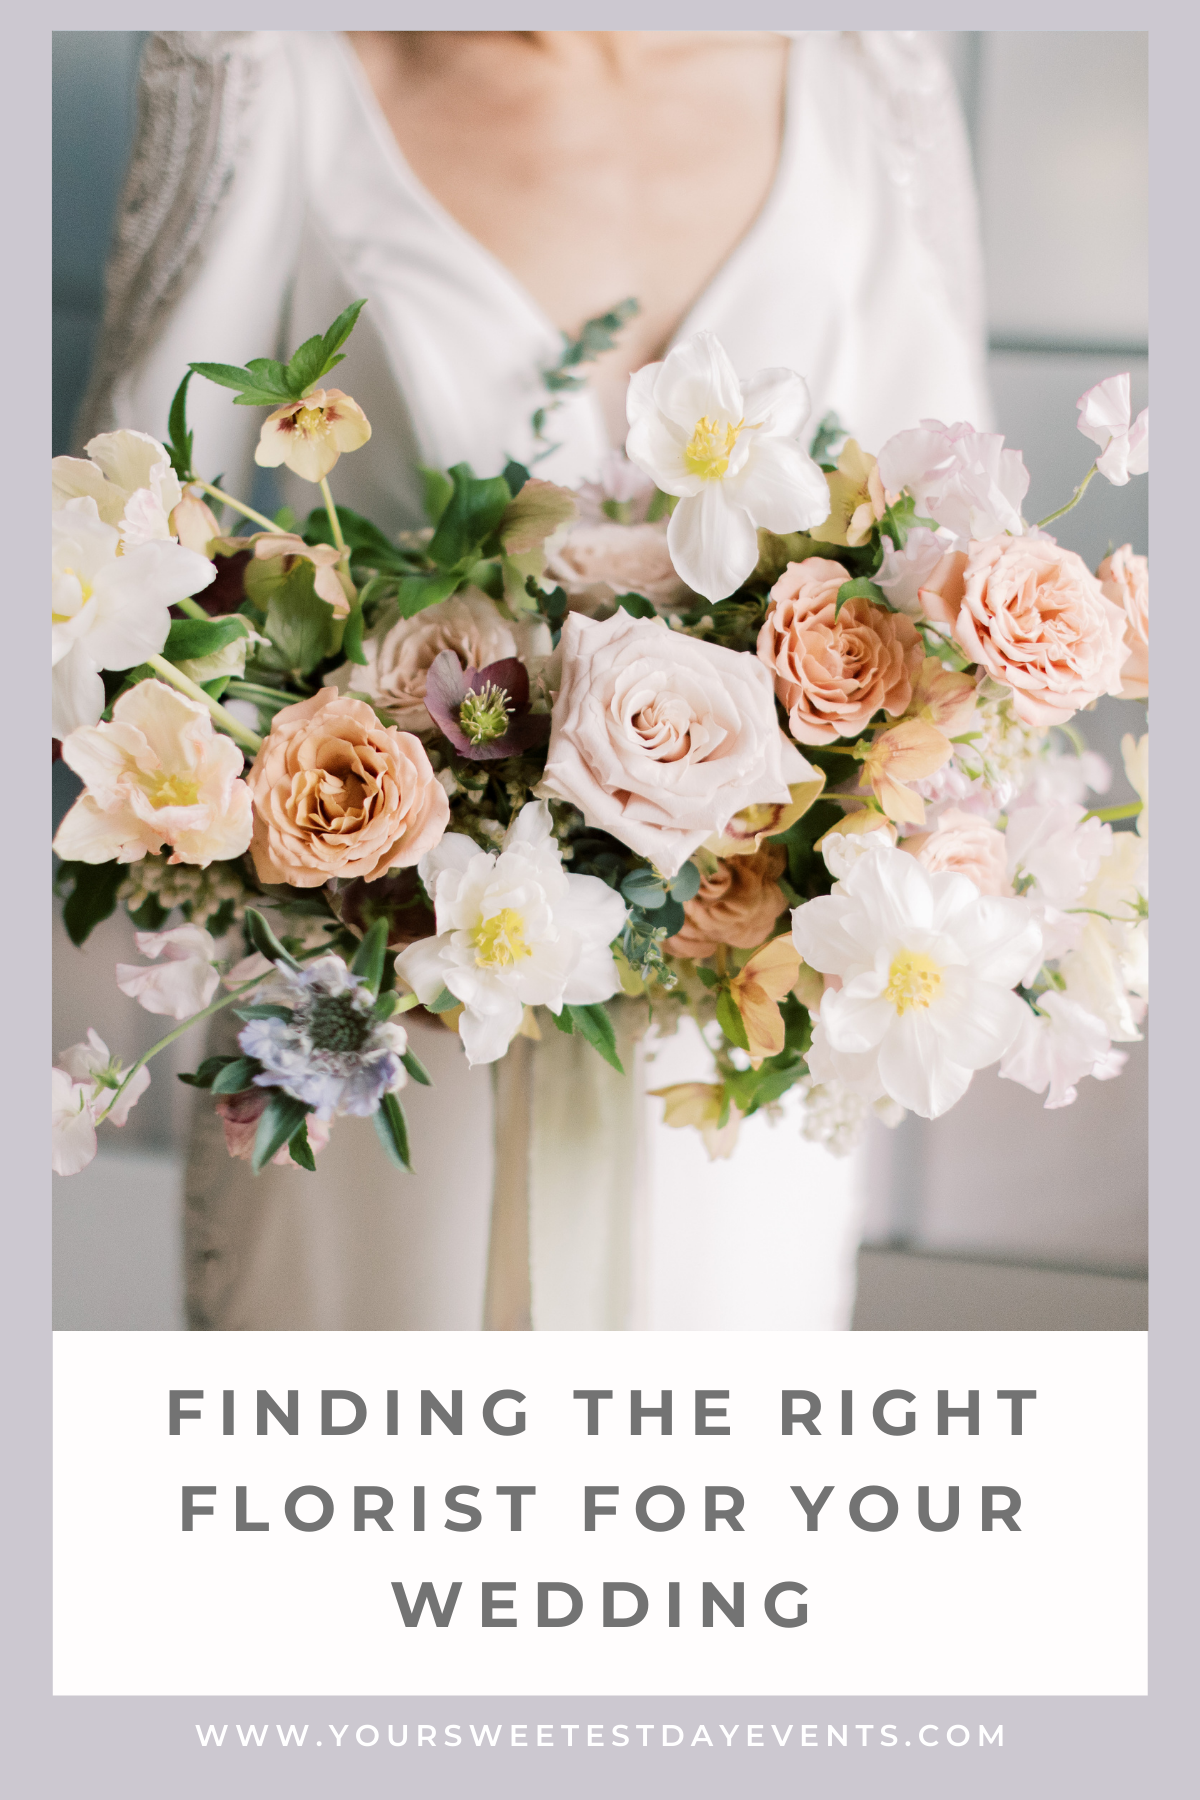 Finding the Right Florist for Your Wedding // Your Sweetest Day Events (relevant hashtags: #weddingplanning #weddingplanner #weddingflorals #weddingfloraldesign #weddingflowers)